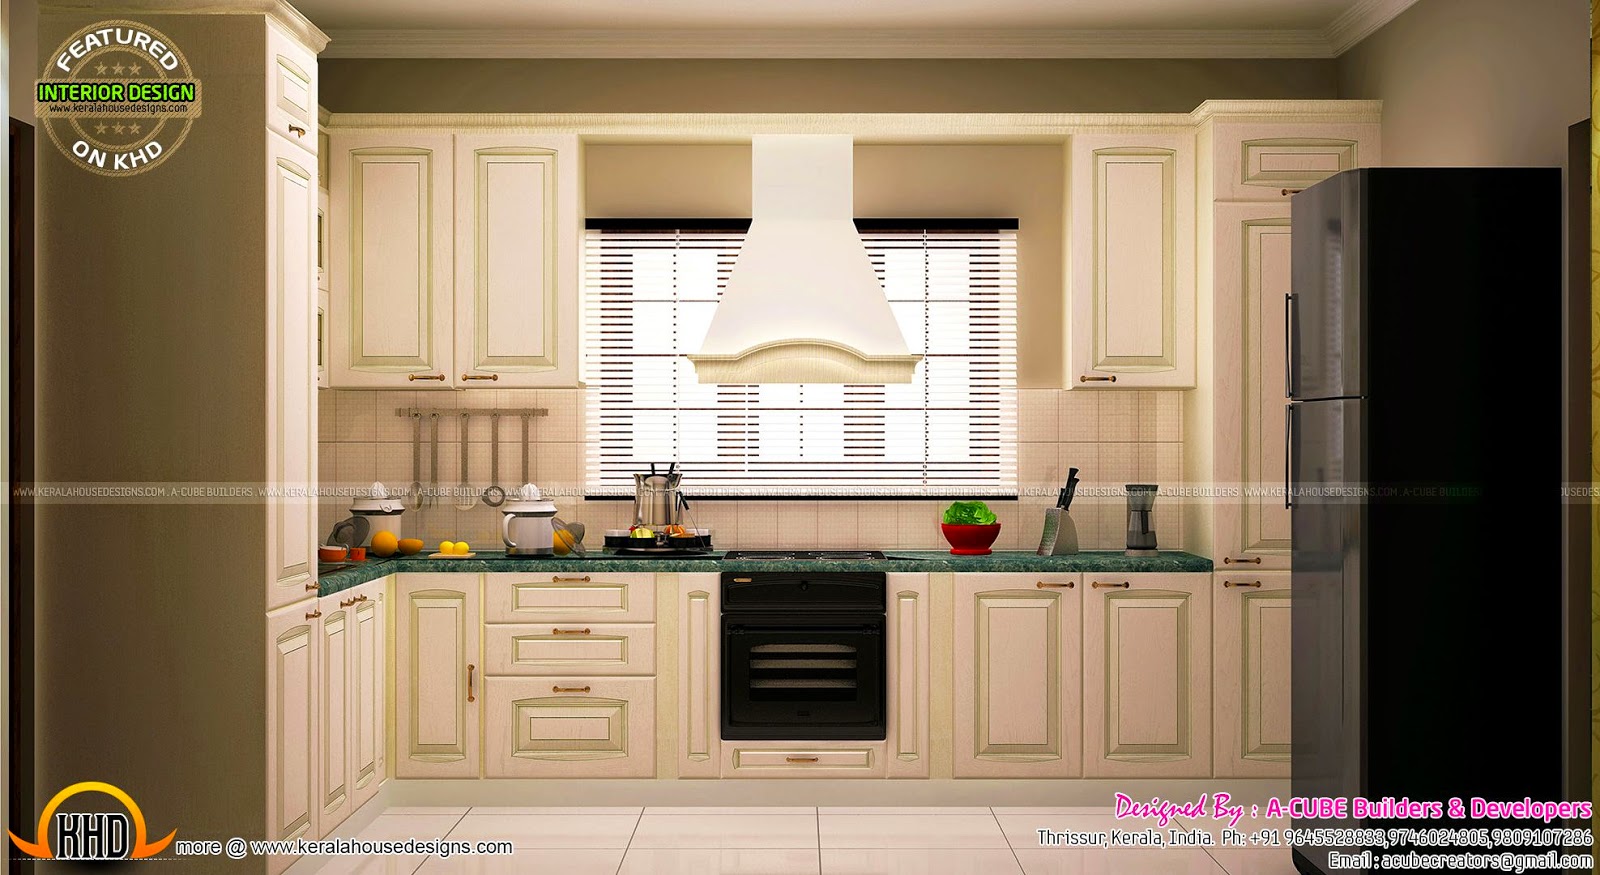 Dining, drawing, living, kitchen interior - Kerala home design and